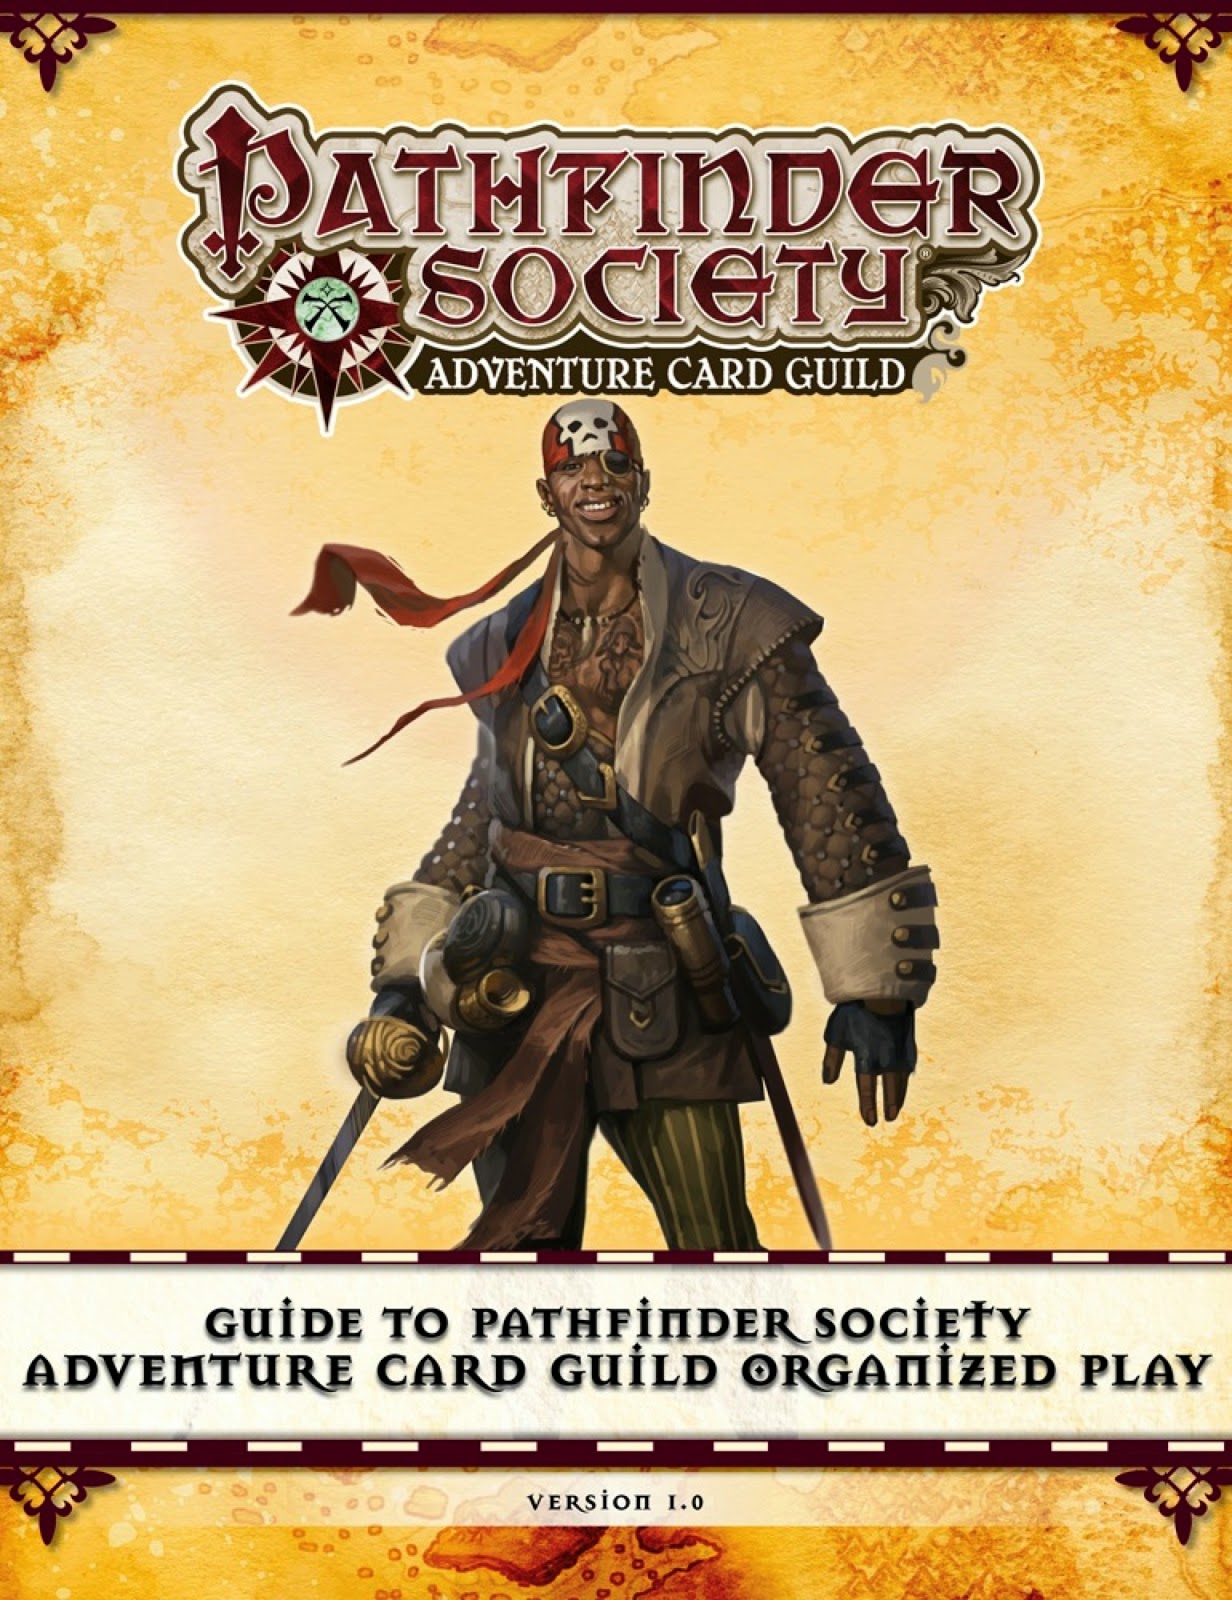 Mummy's Mask Adventure Guide for the Pathfinder Adventure Card Game  (complete)